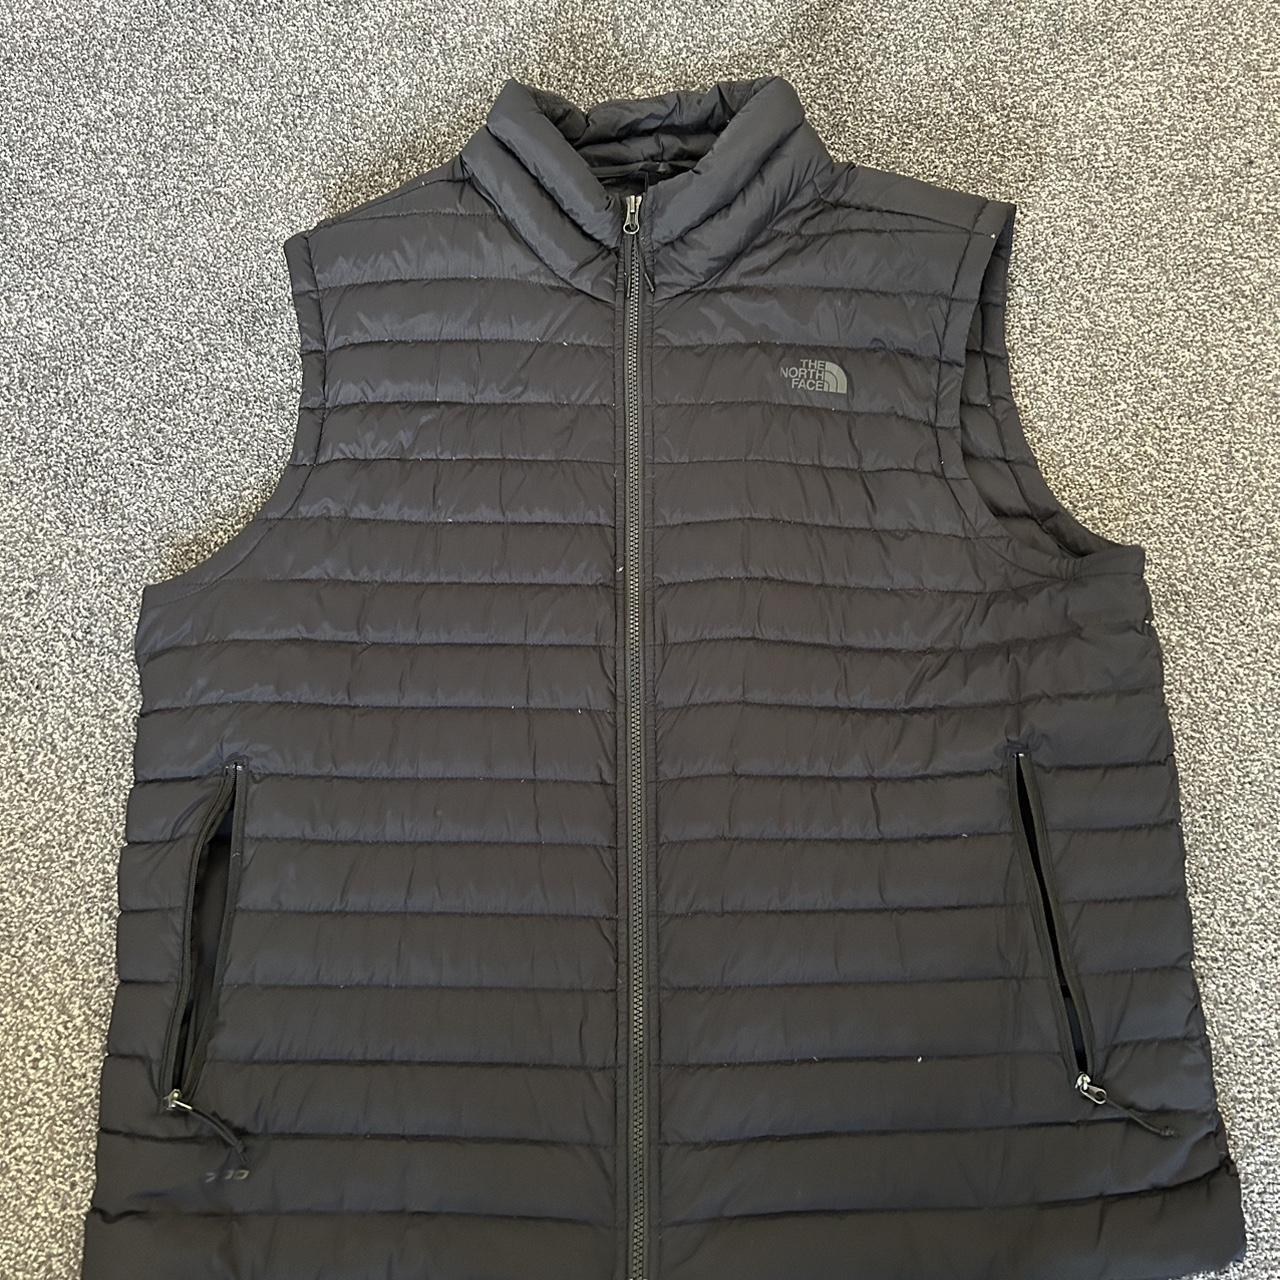 North face body warmer xxl in good condition £80 - Depop